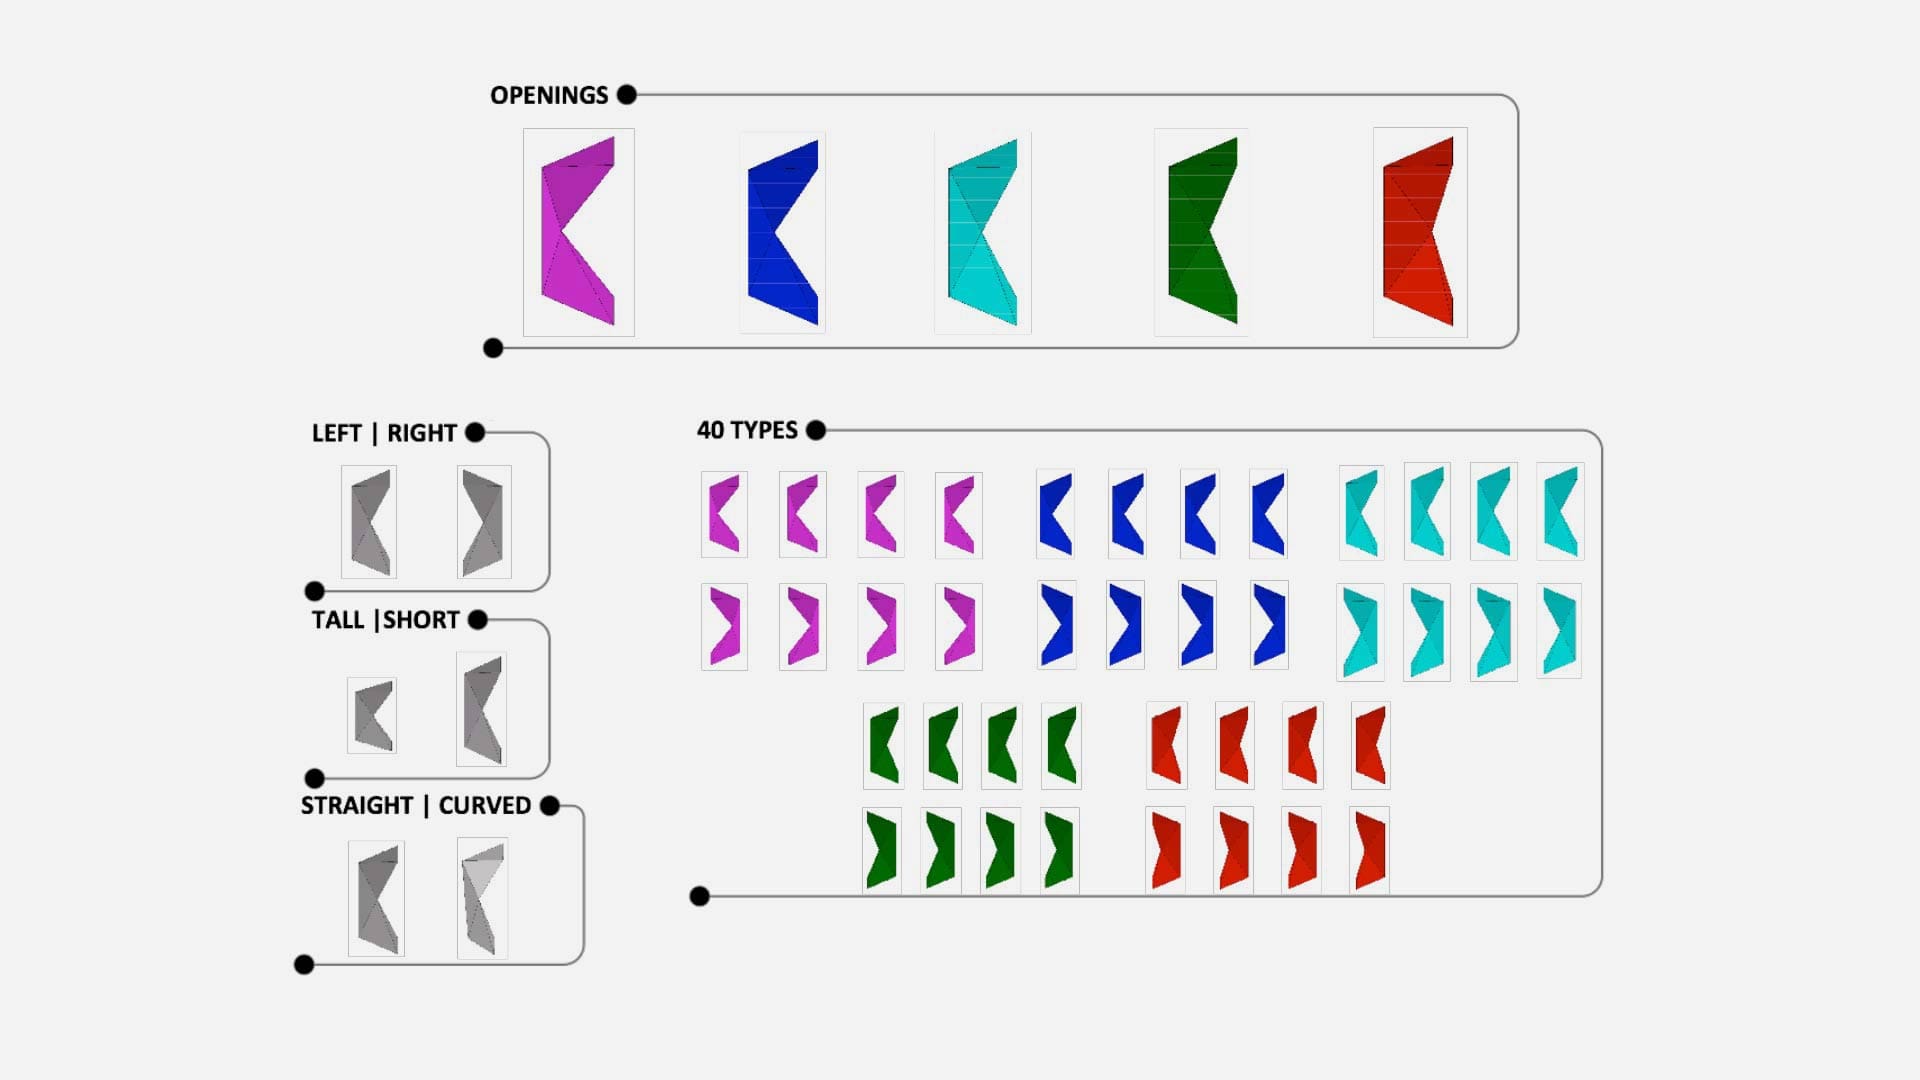 Diagram of the 40 panel types used to create the IwamotoScott Facade at Miami Design District.